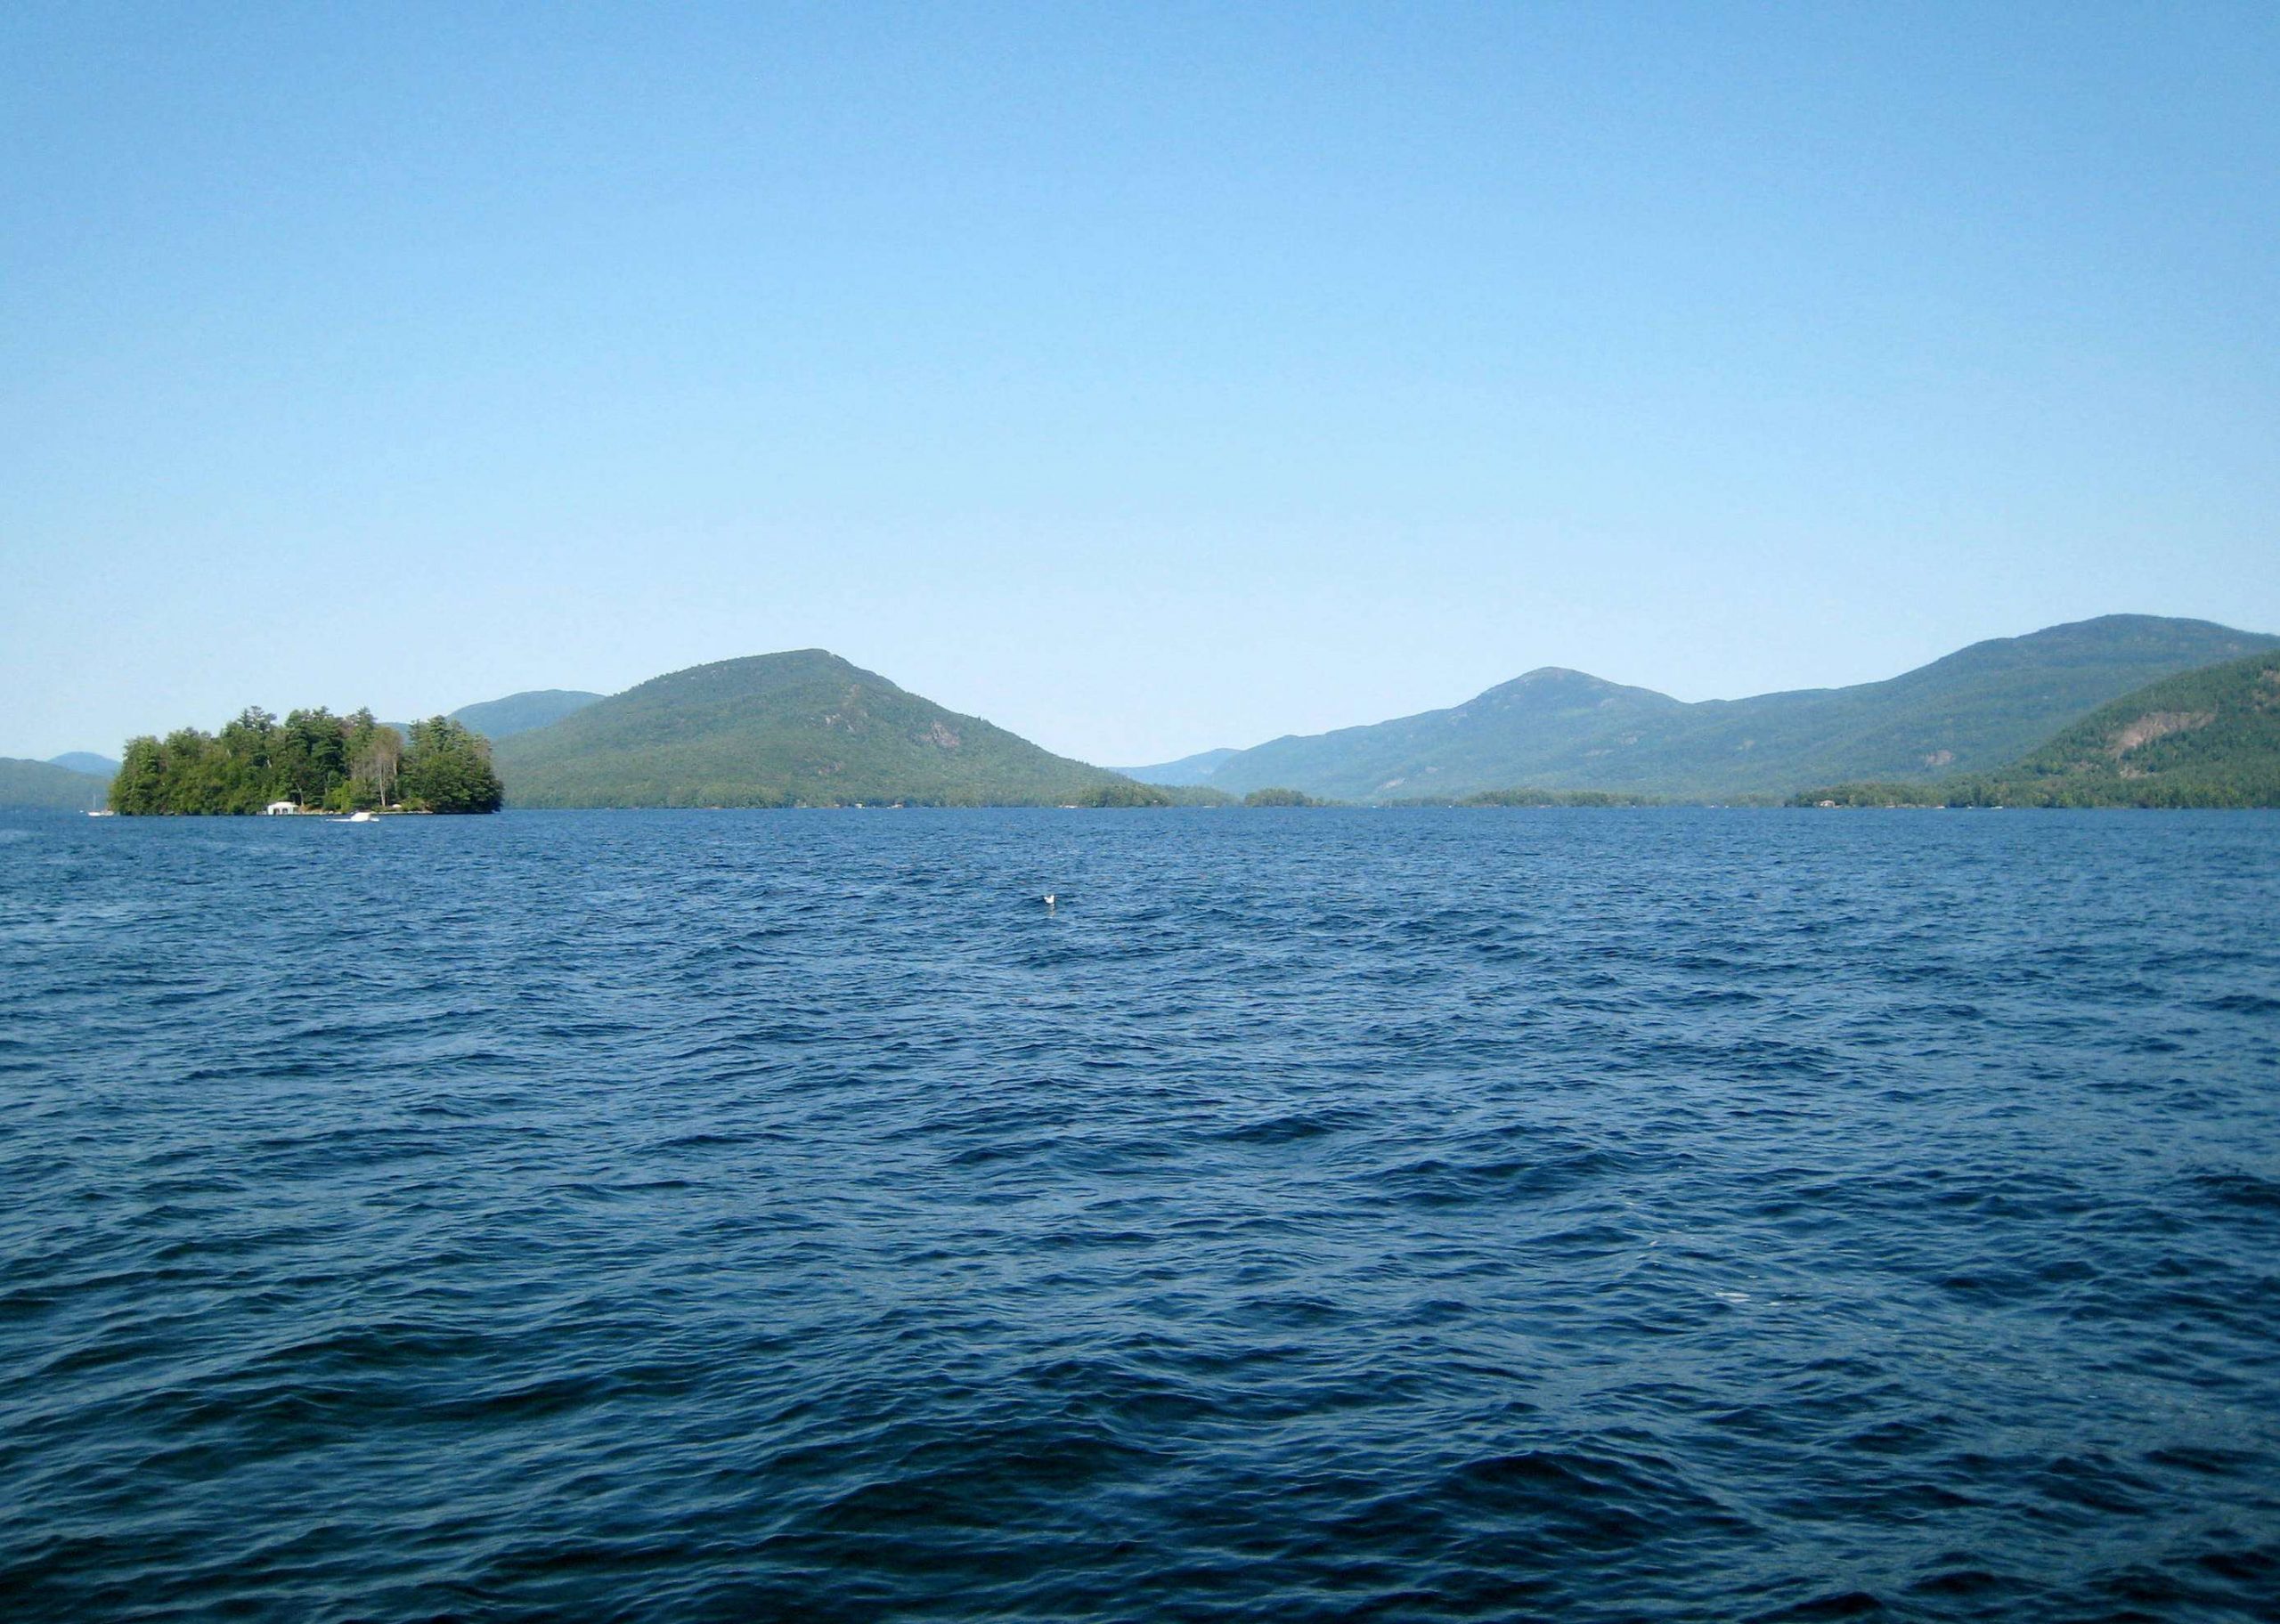 <b>11. Lake George</b> Lake George is stocked annually with landlocked salmon and has an excellent naturally reproducing population of lake trout. Brook trout can also be found at the mouth of many of the lakes tributaries. Lake George also ranks among the top five bass fishing destinations in New York State. Many ice anglers target the abundant schools of yellow perch and black crappie that can be found in many small shoreline bays.